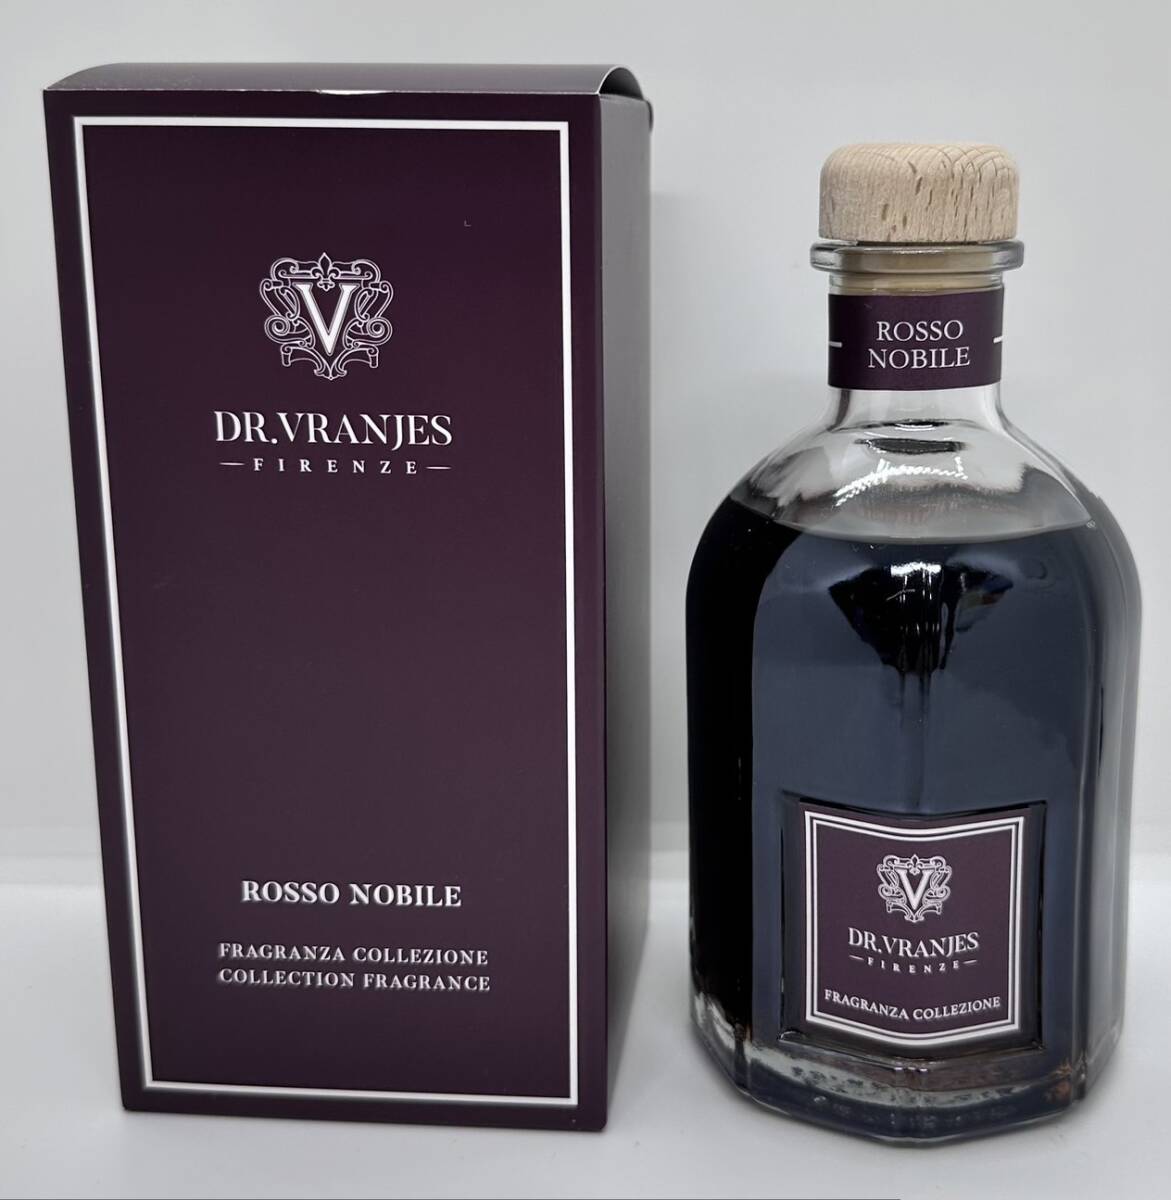  unused goods /DR.VRANJES dot -ruvulanies rosso no-bire250ml diffuser stick attaching / room fragrance / present condition goods / including in a package un- possible 